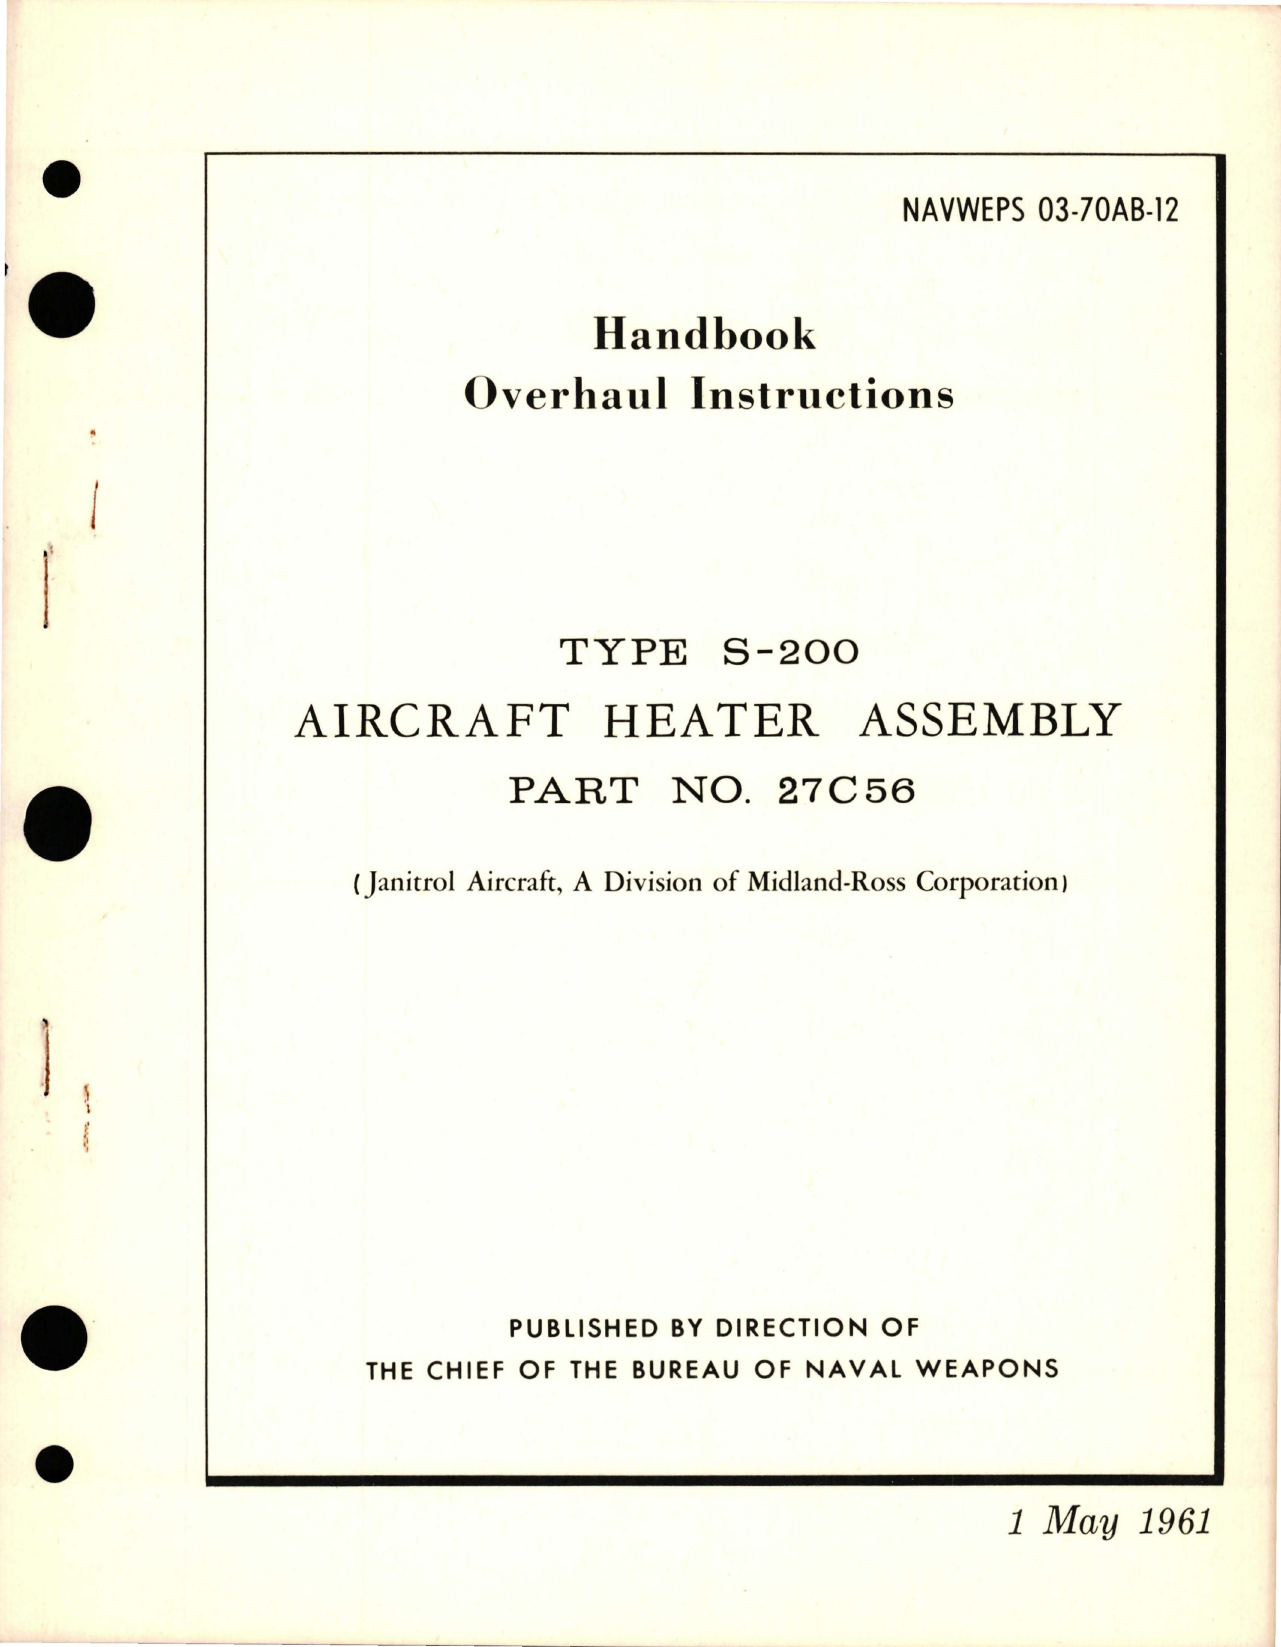 Sample page 1 from AirCorps Library document: Overhaul Instructions for Heater Assembly - Type S-200 - Part 27C56 